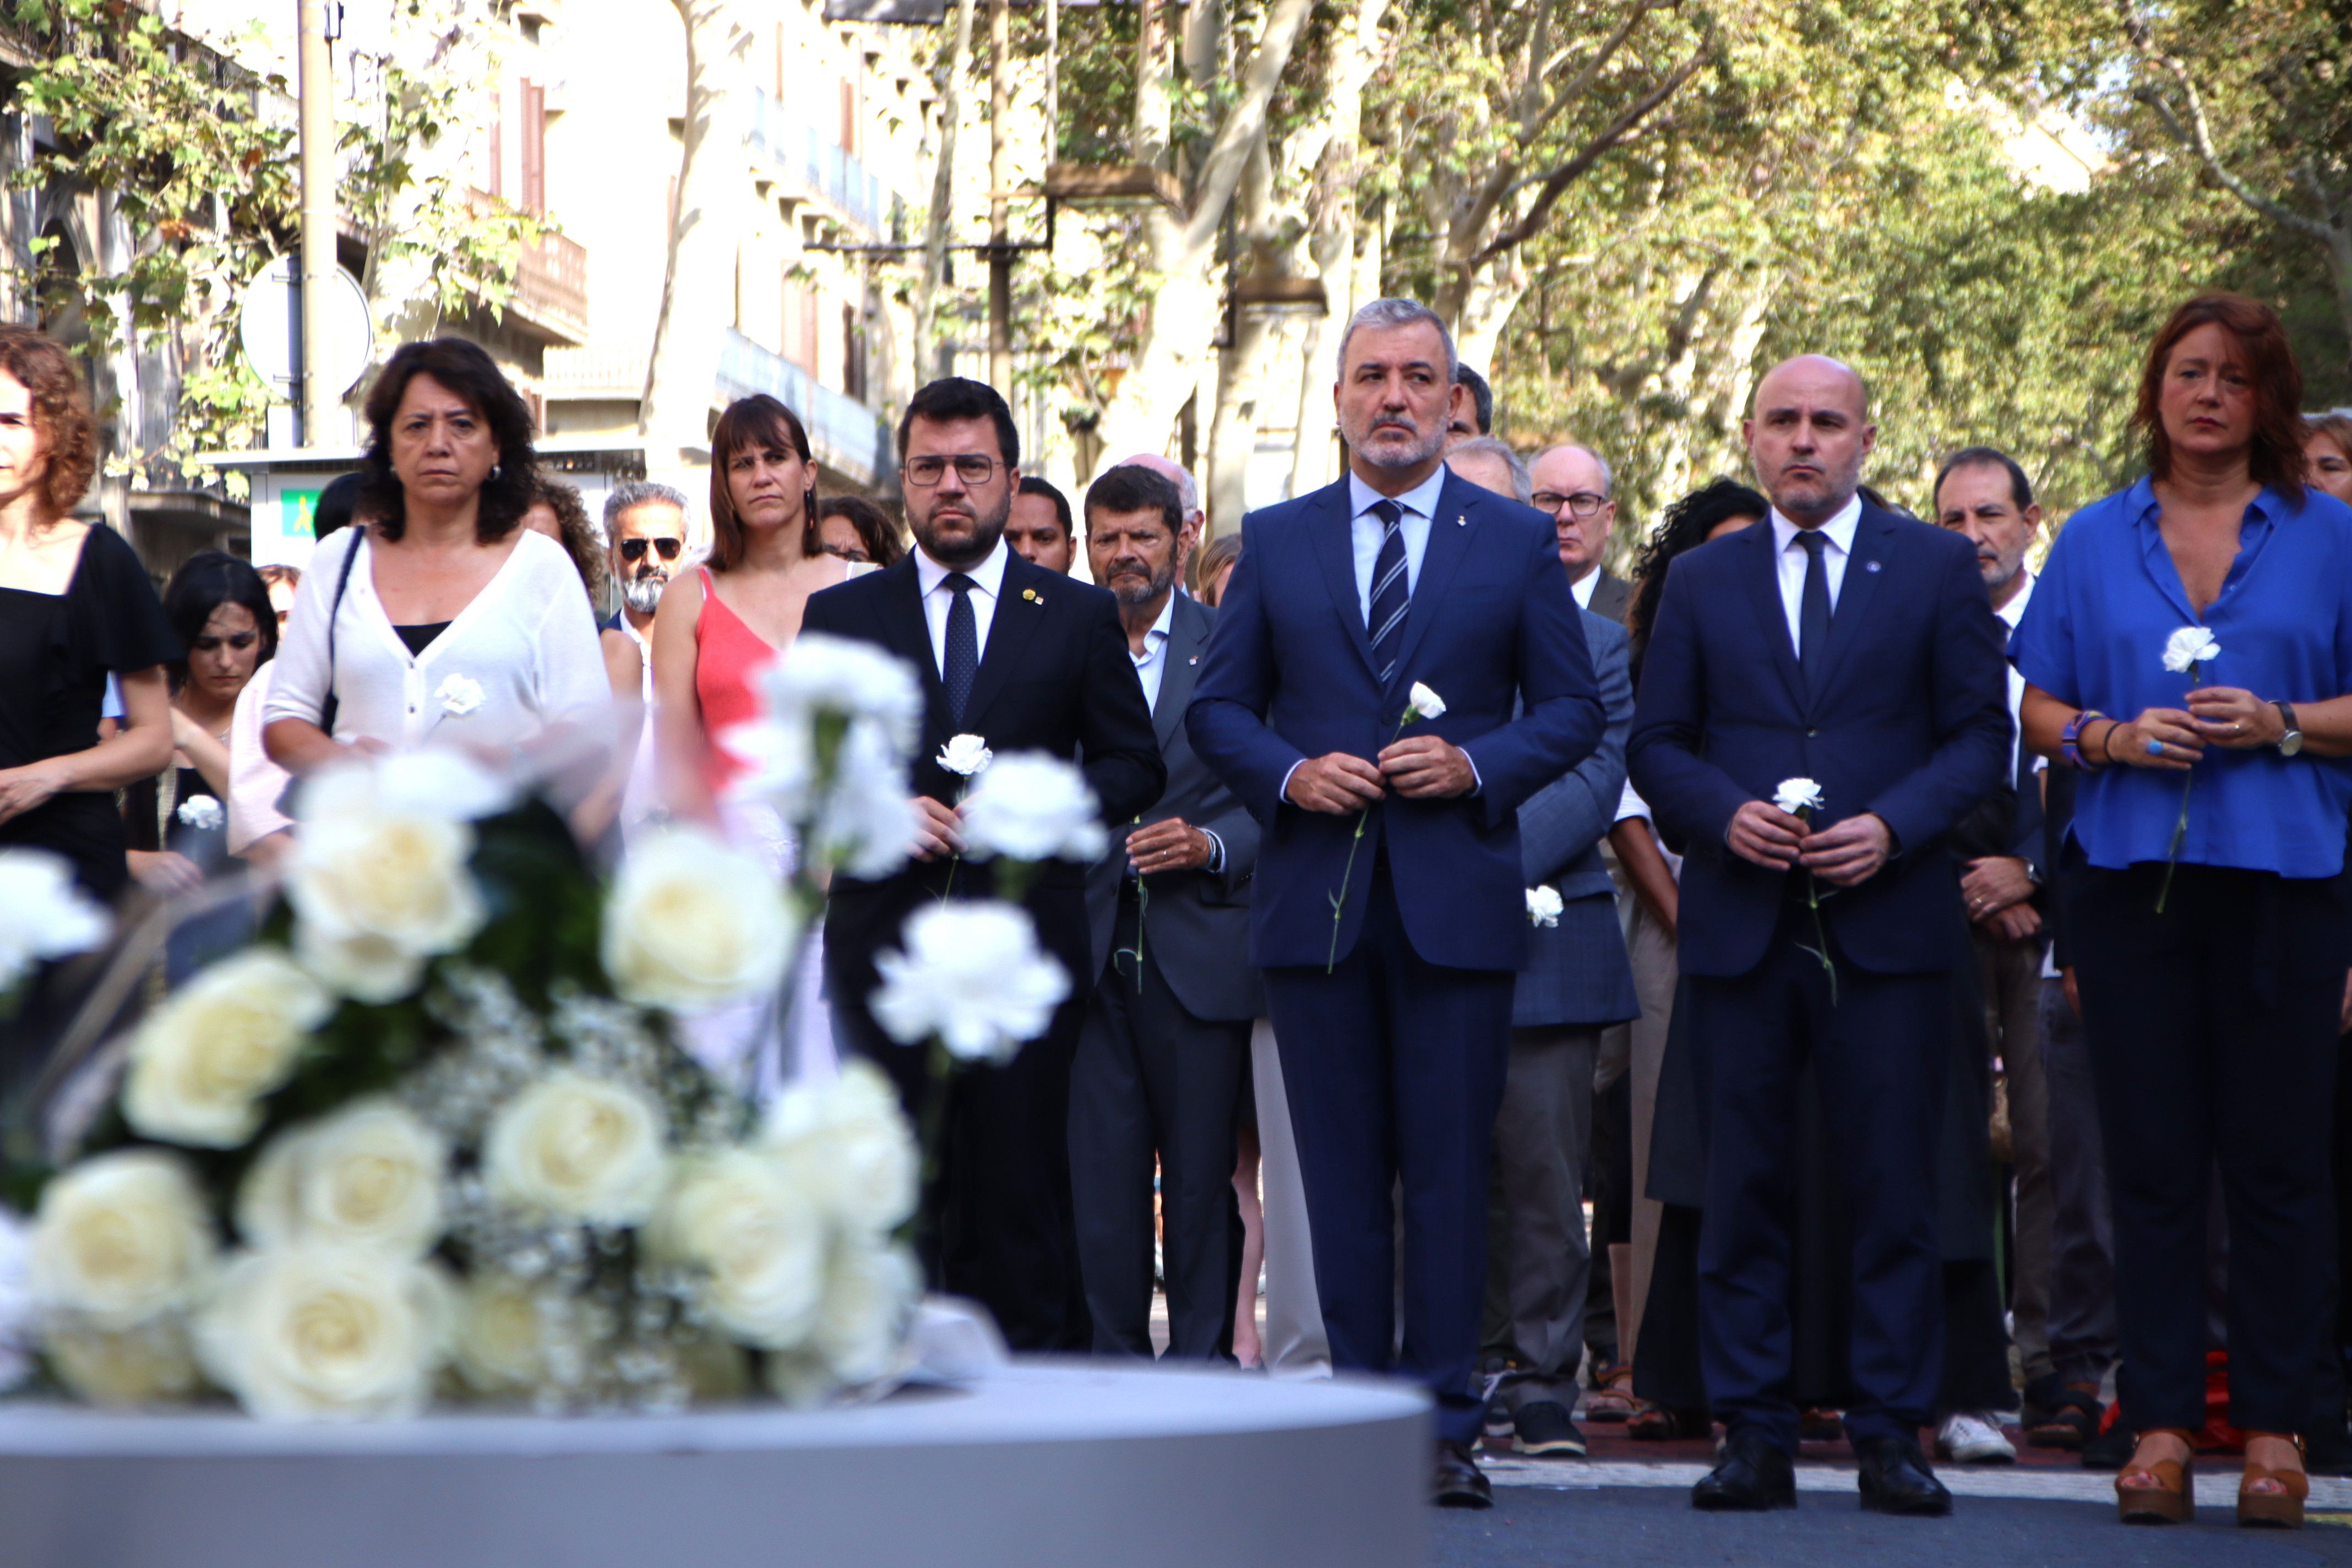 Catalan President Pere Aragonés and Barcelona mayor Jaume Collboni along with other authorities in the August 17 commemorative event